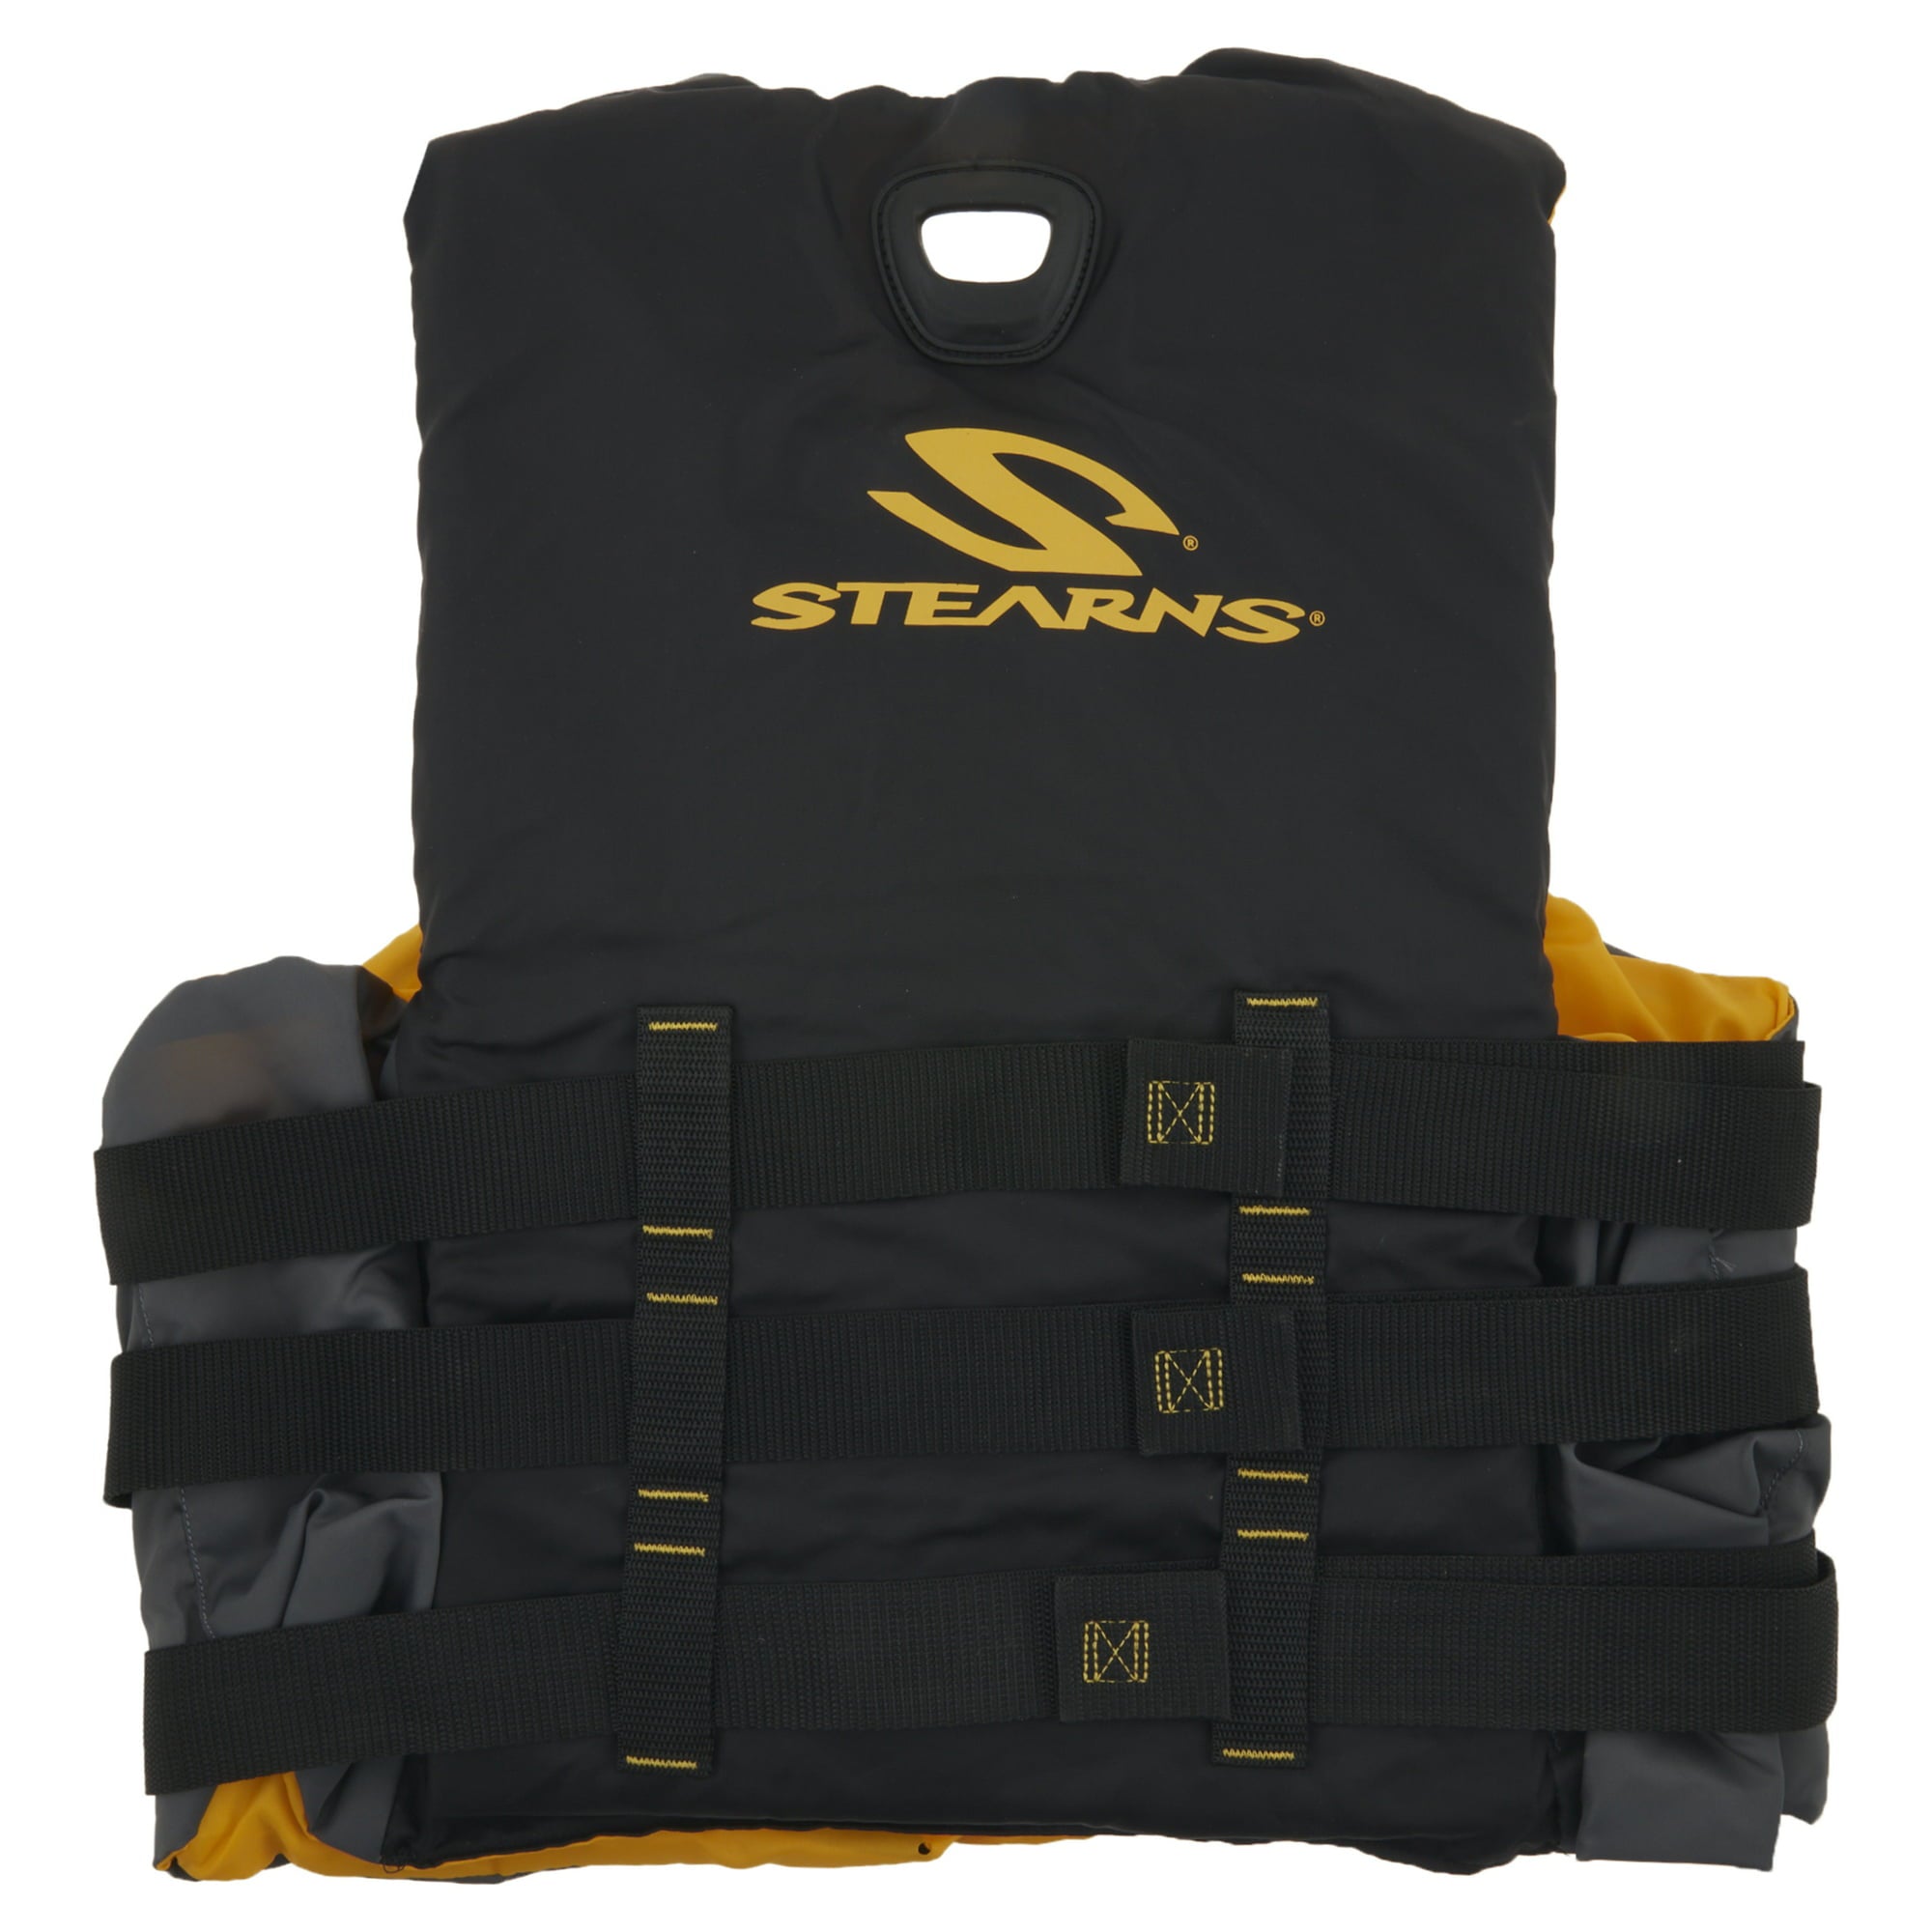 Stearns Infinity Series Antimicrobial Life Jacket, Gray & Yellow, Size Options:  SM/MD, L/XL, and 2X/3X